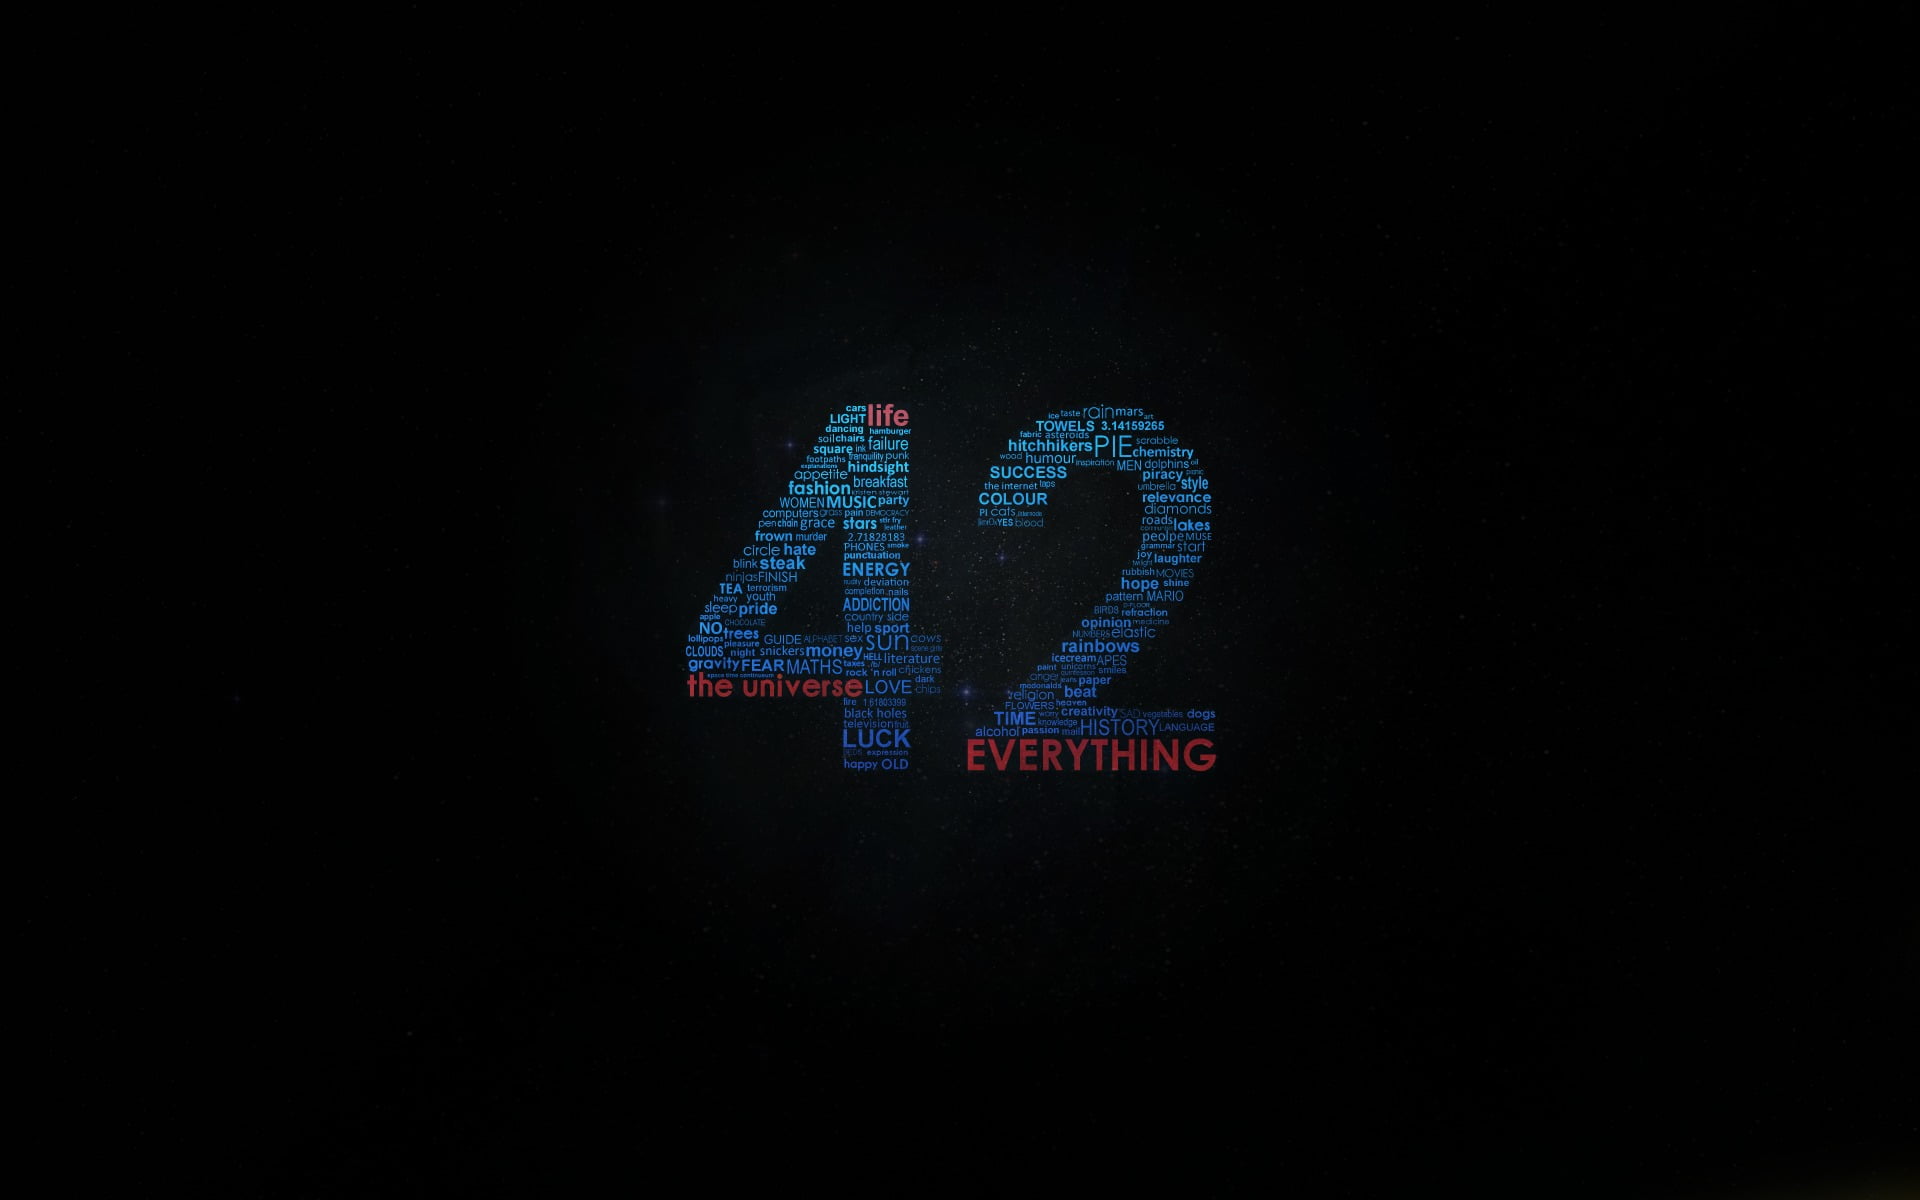 42 Everything poster, The Hitchhiker's Guide to the Galaxy, universe